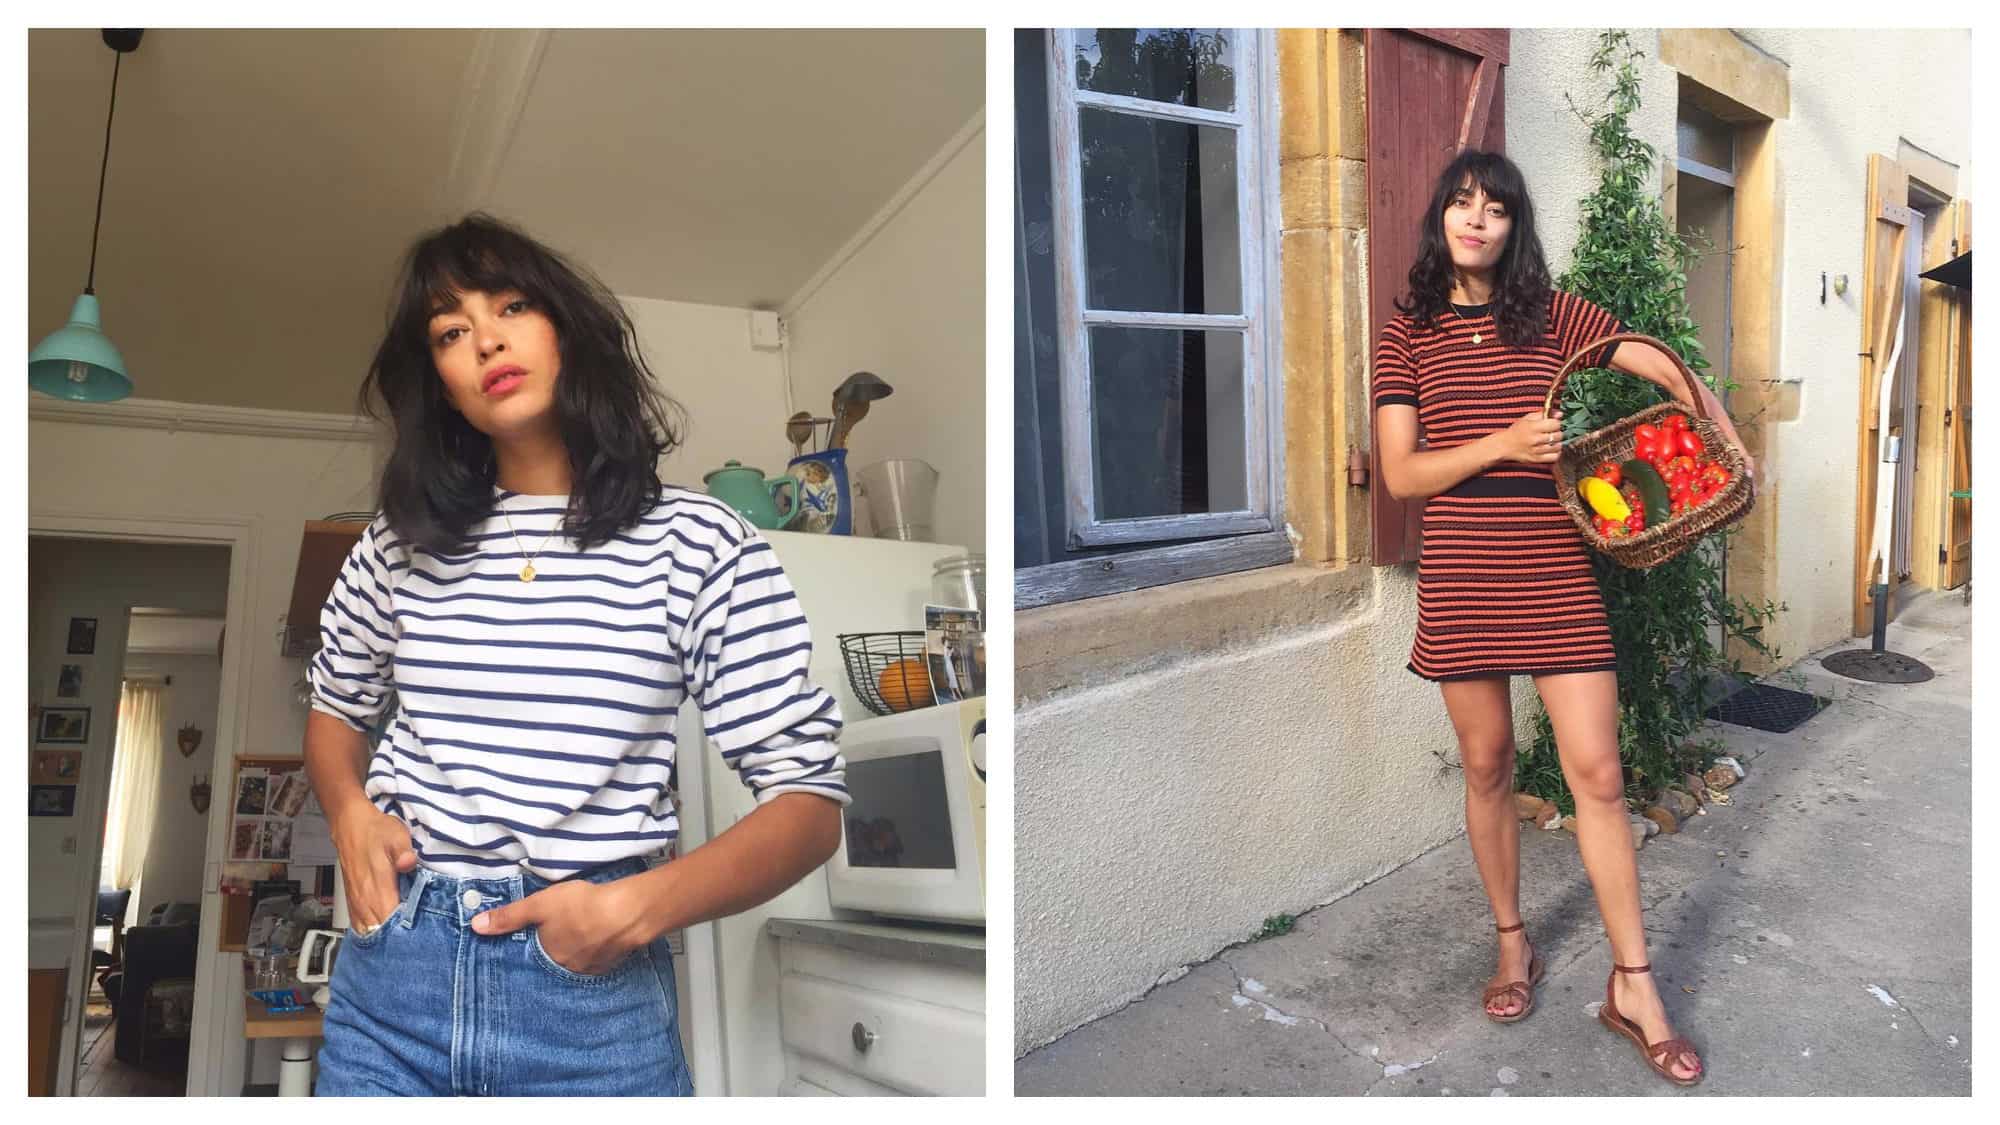 Instagram French fashion influencer Julia Jean-Baptiste, wearing a striped white and navy top with jeans (left) and seen here, wearing a striped max dress, carrying a basket of tomatoes (right).